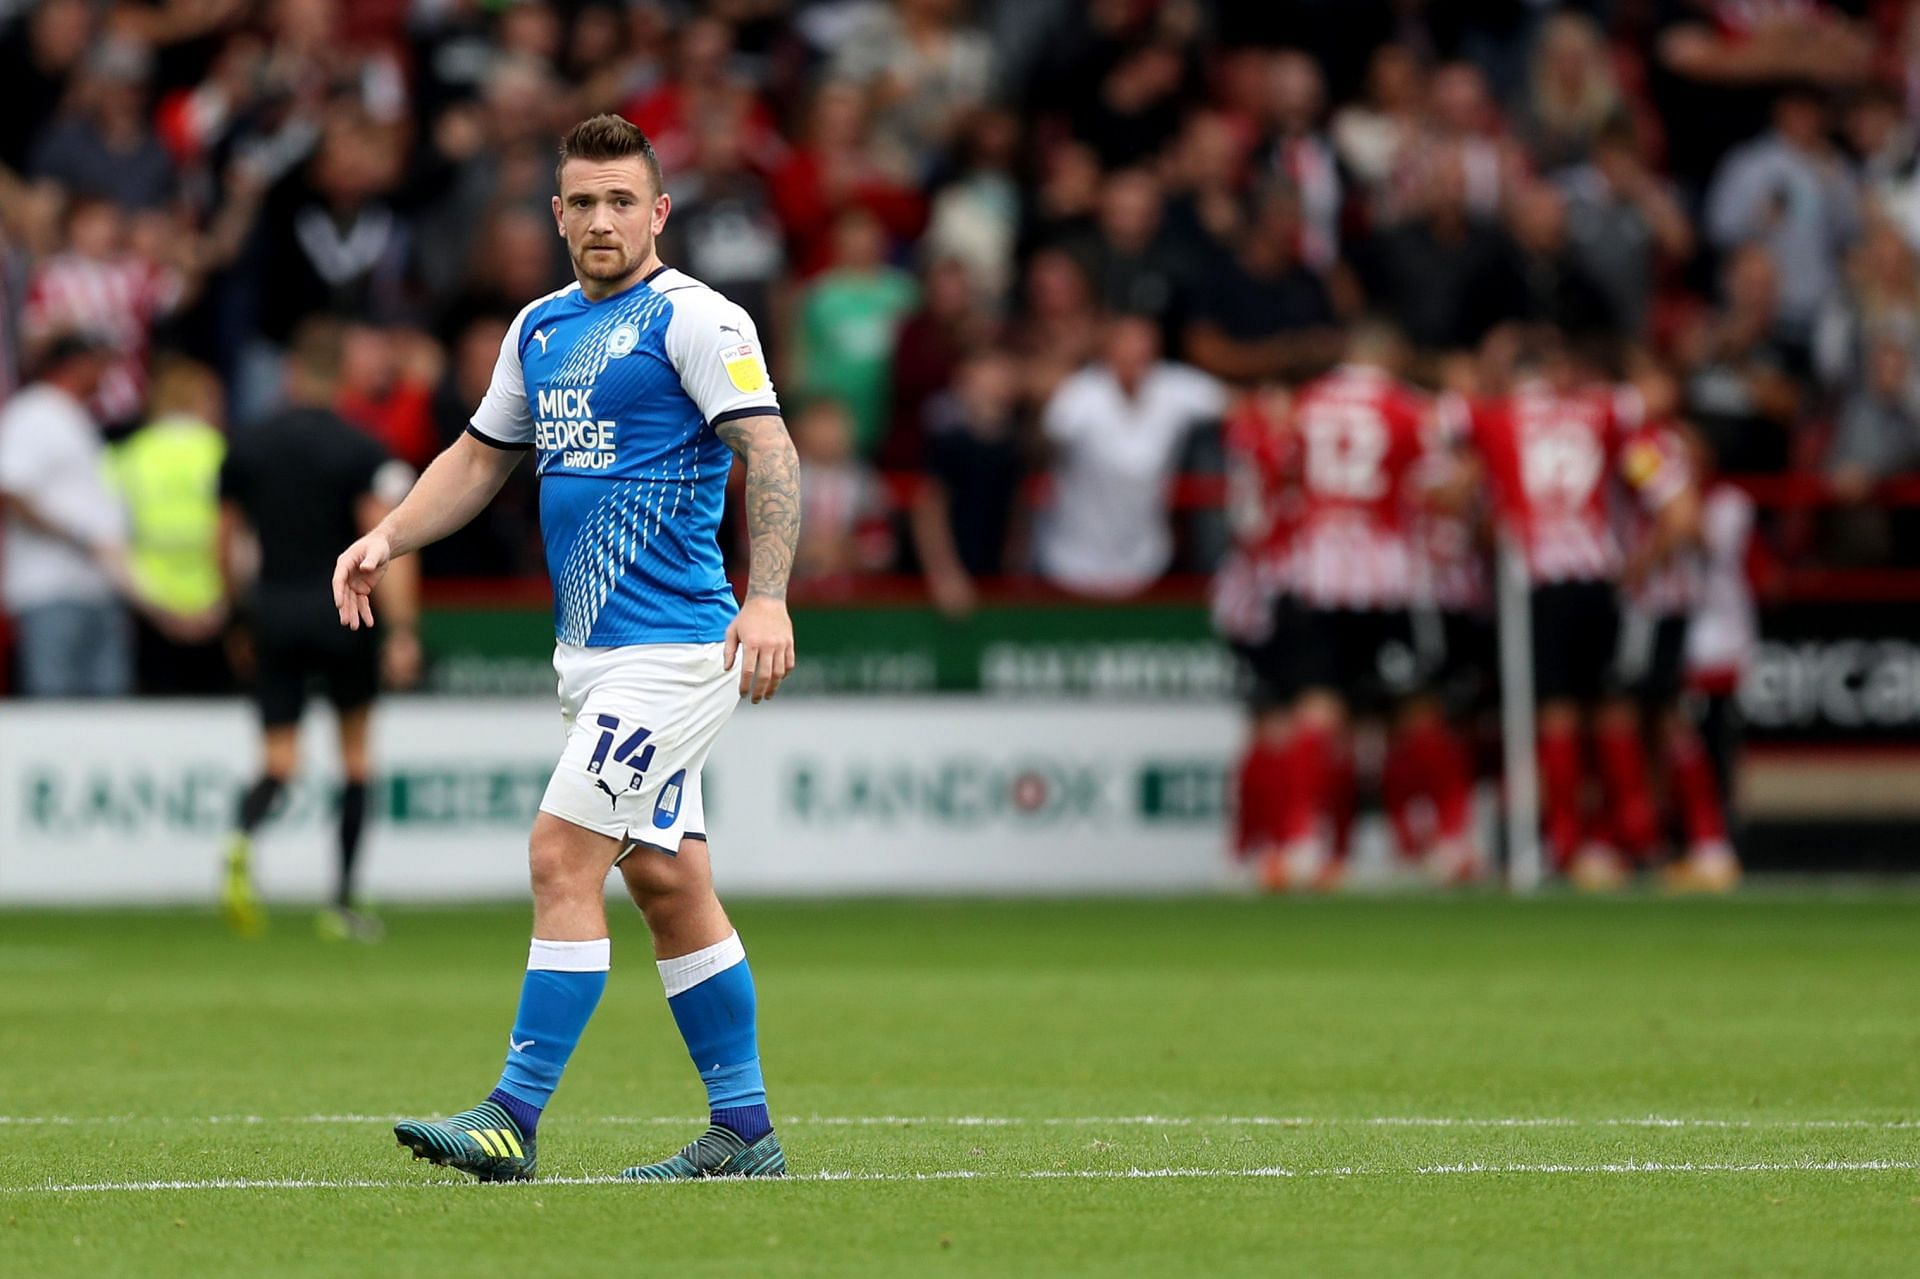 Jack Marriott has been out since last September with a tendon injury